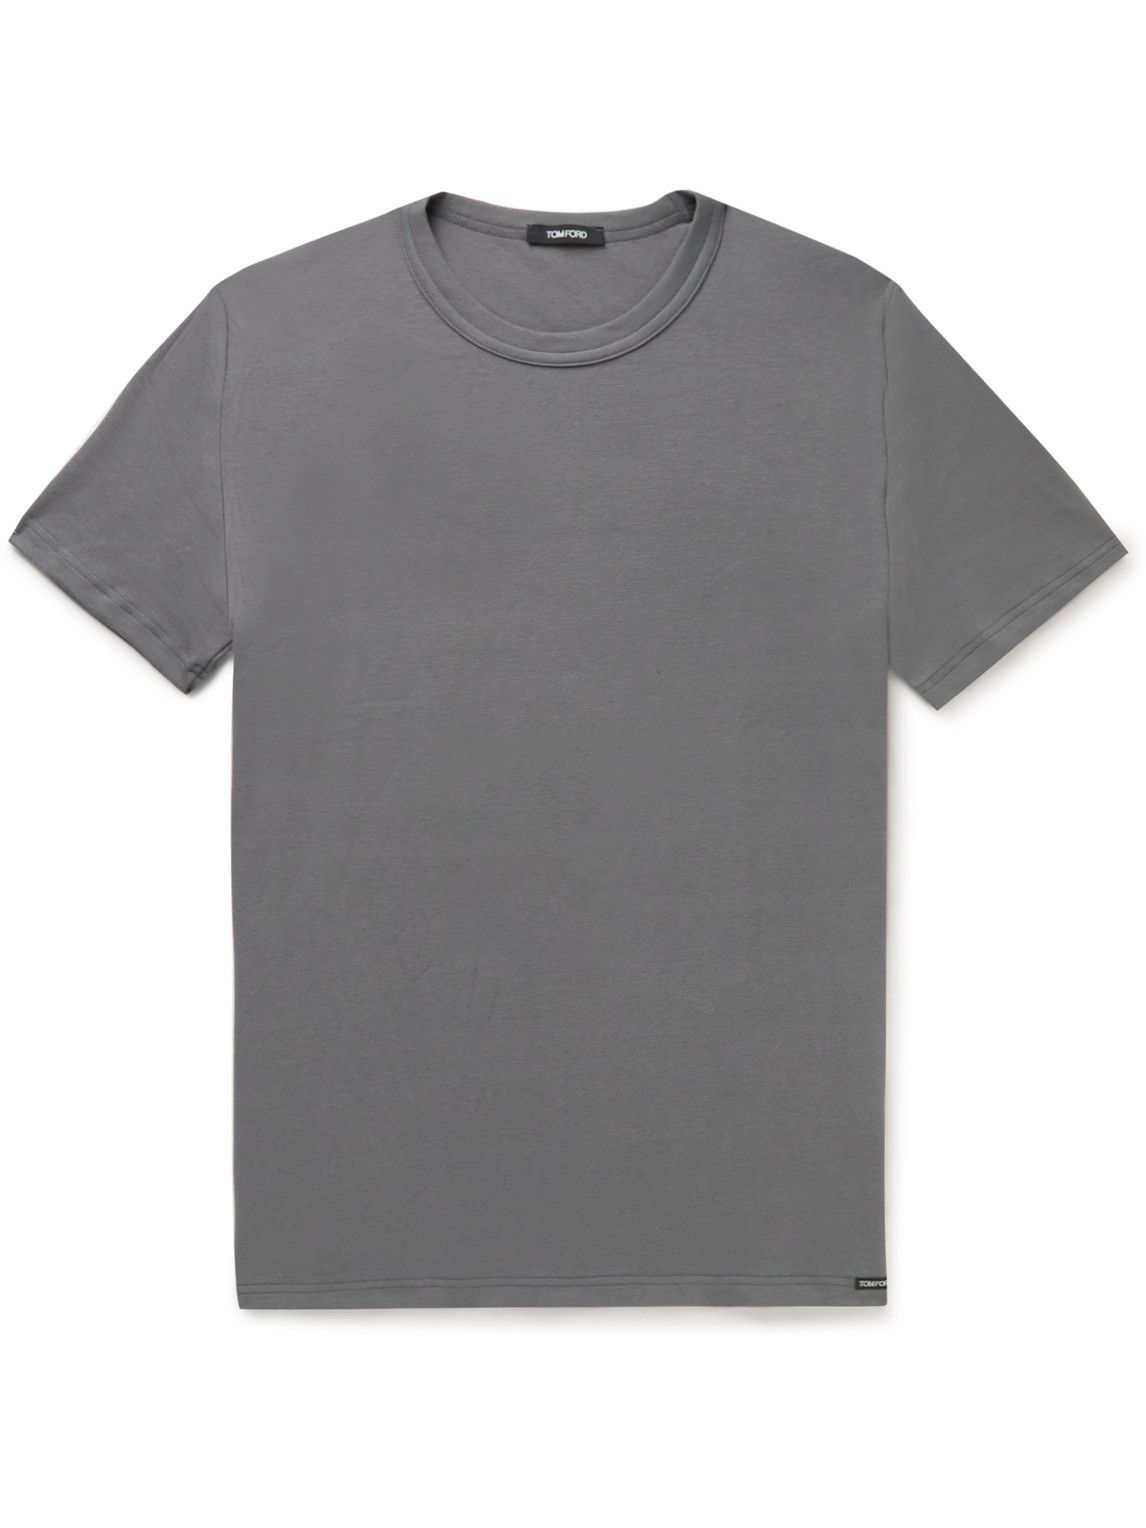 TOM FORD - Slim-Fit Stretch-Cotton Jersey T-Shirt - Gray TOM FORD